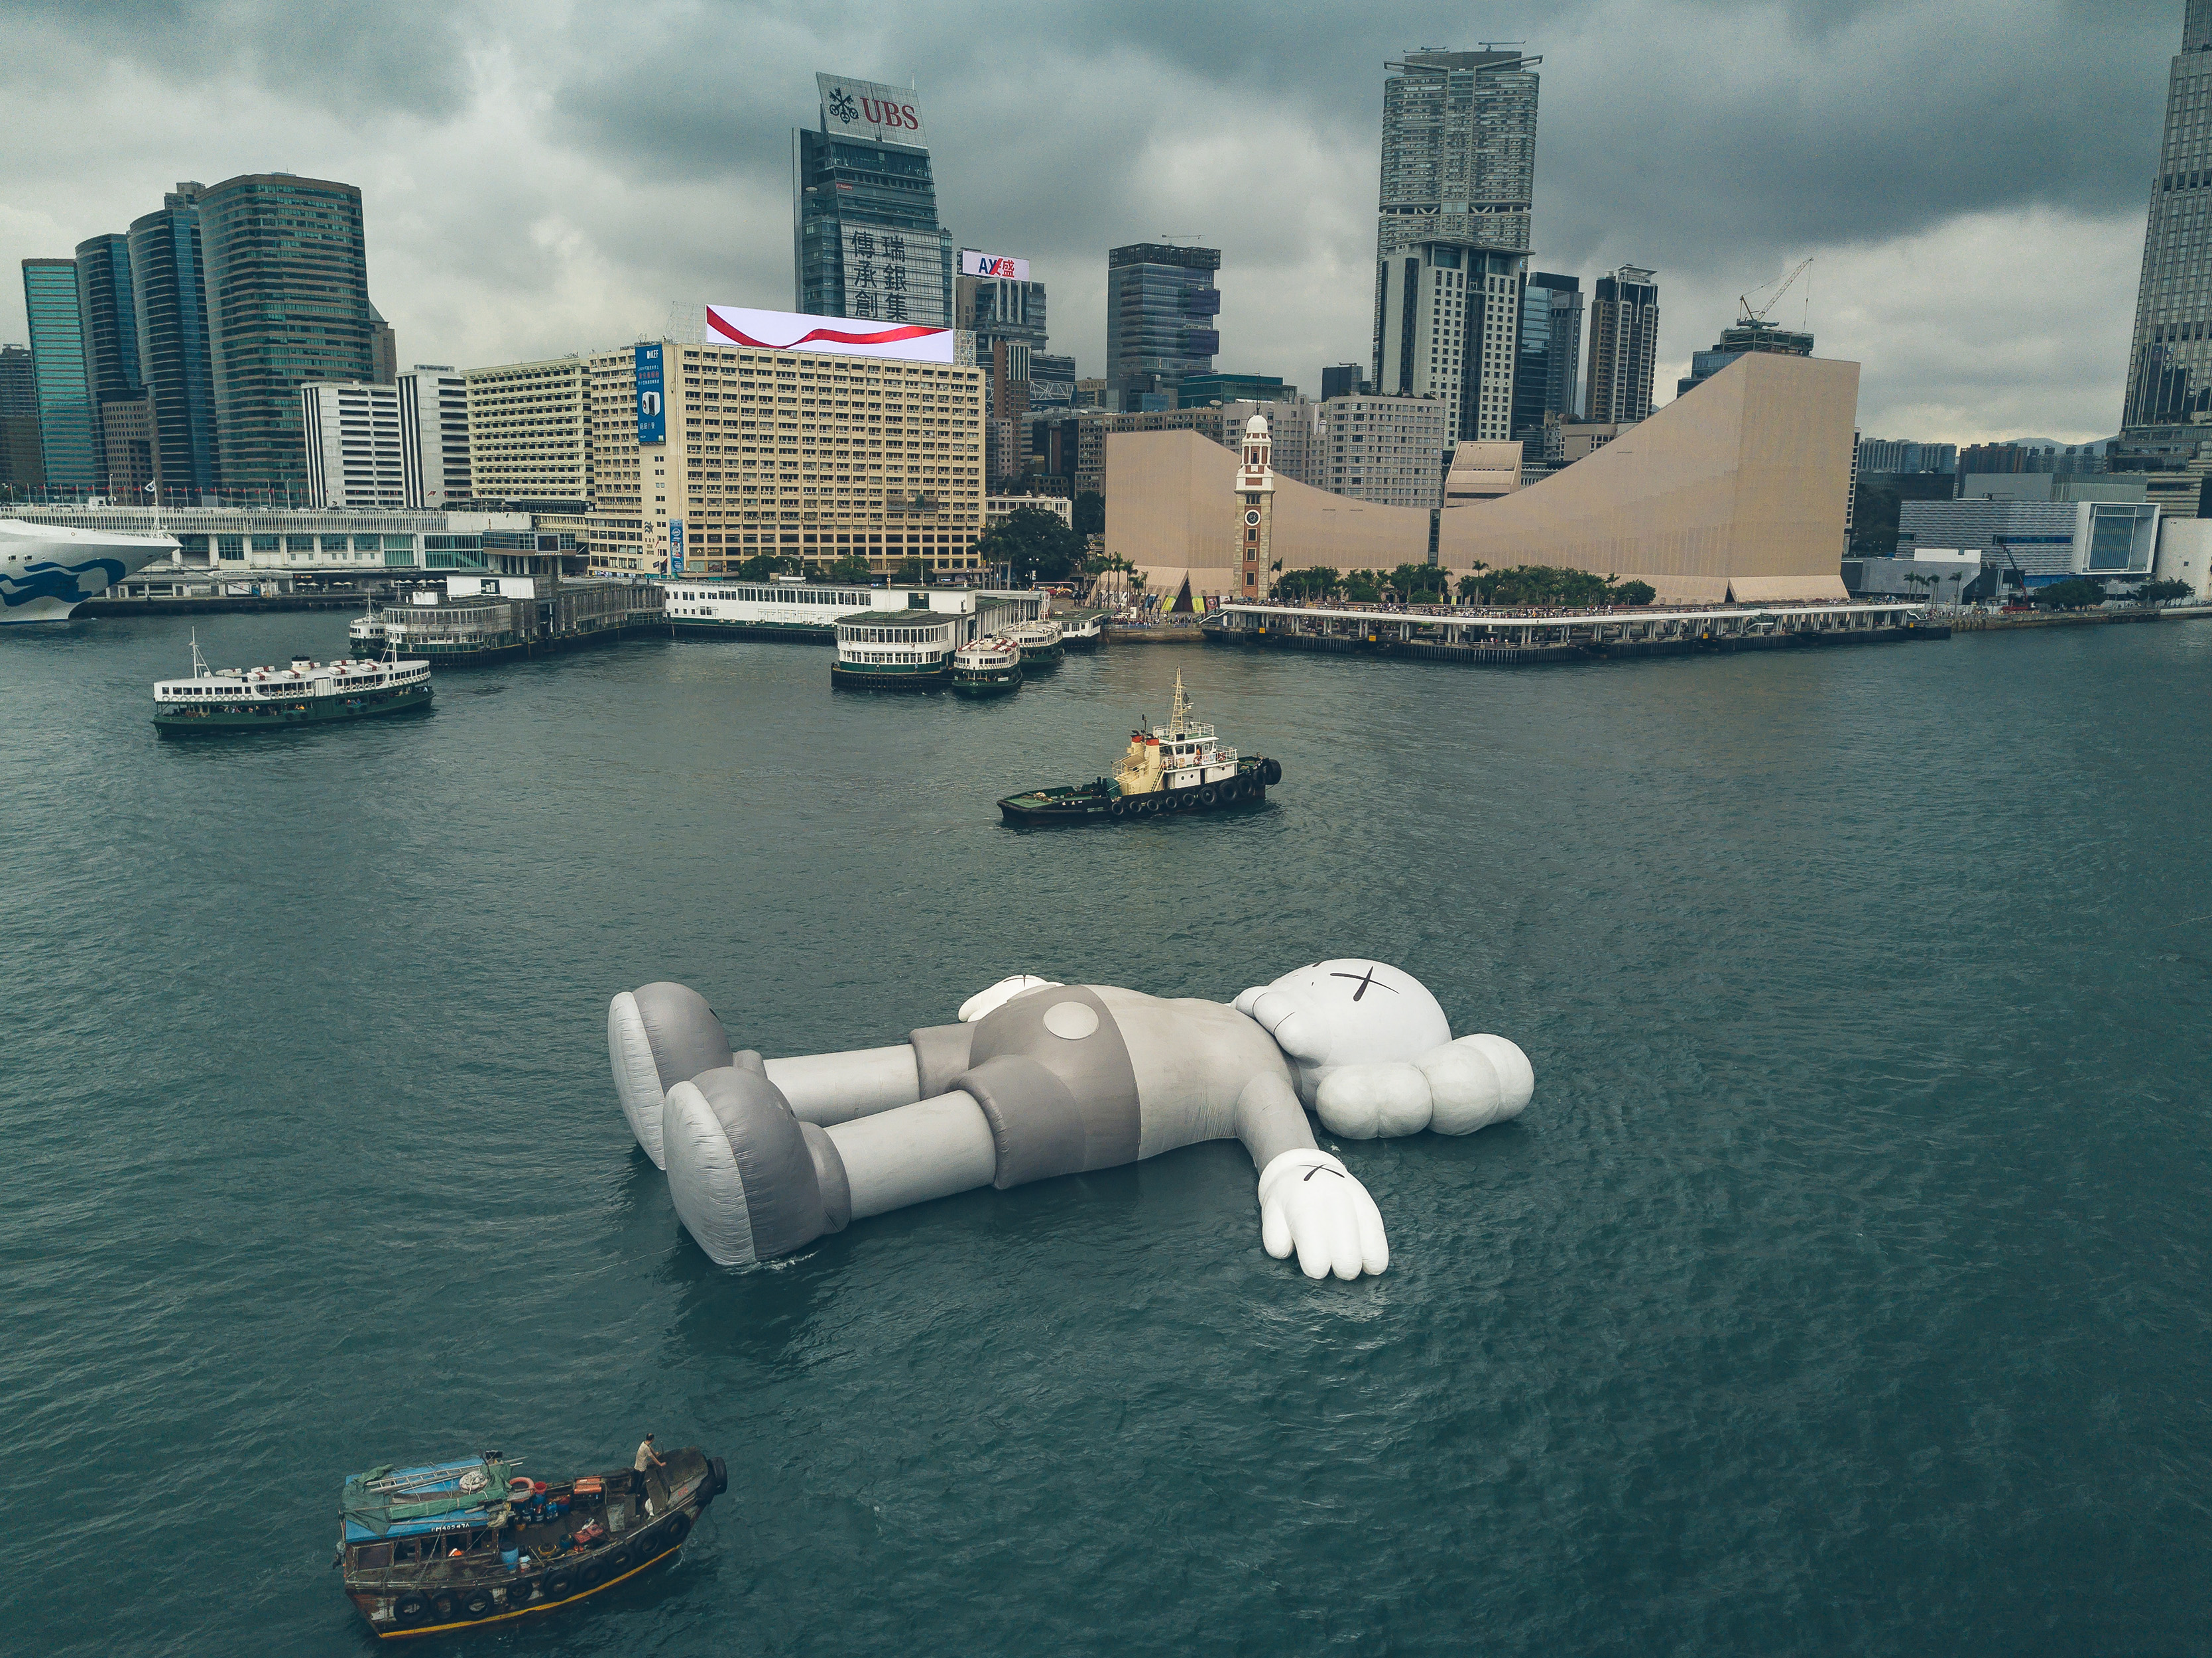 KAWS' sculpture 'Companion' floats in Victoria Harbor in Hong Kong on March 22, 2019. (Harimao Lee)